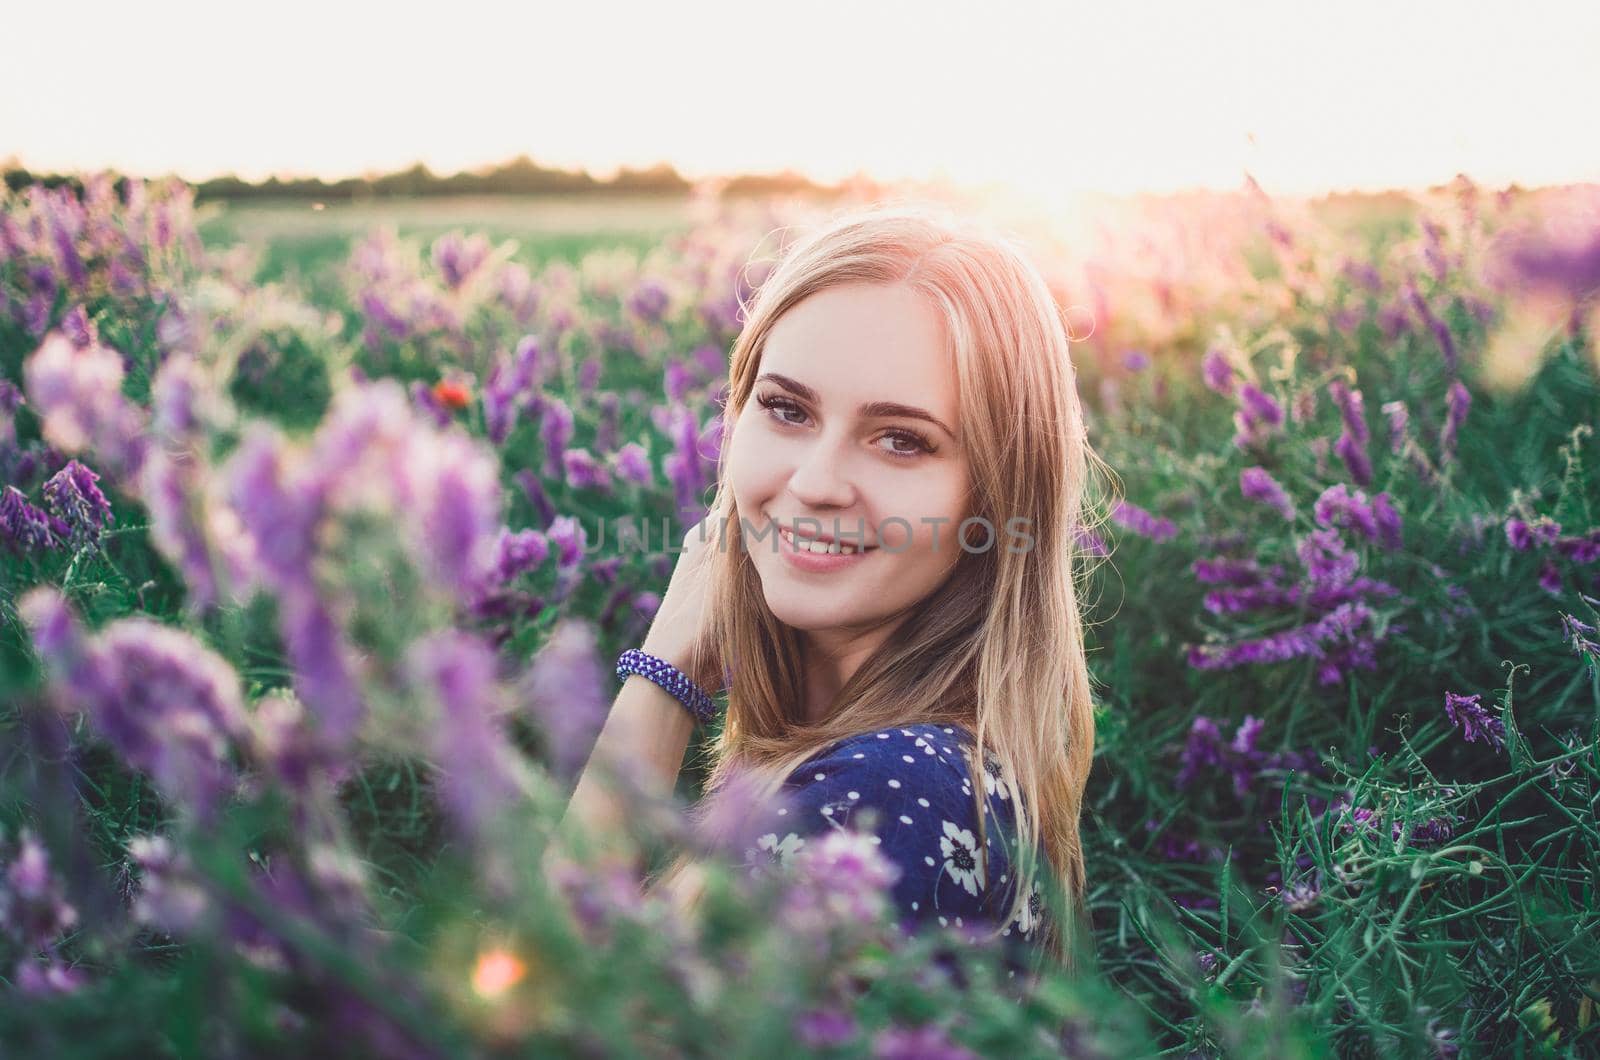 Light-skinned happy smiling European blonde young slim girl walks on tall grass overgrown with purple flowers. Women's blue short skin-tight dress with white daisy print.